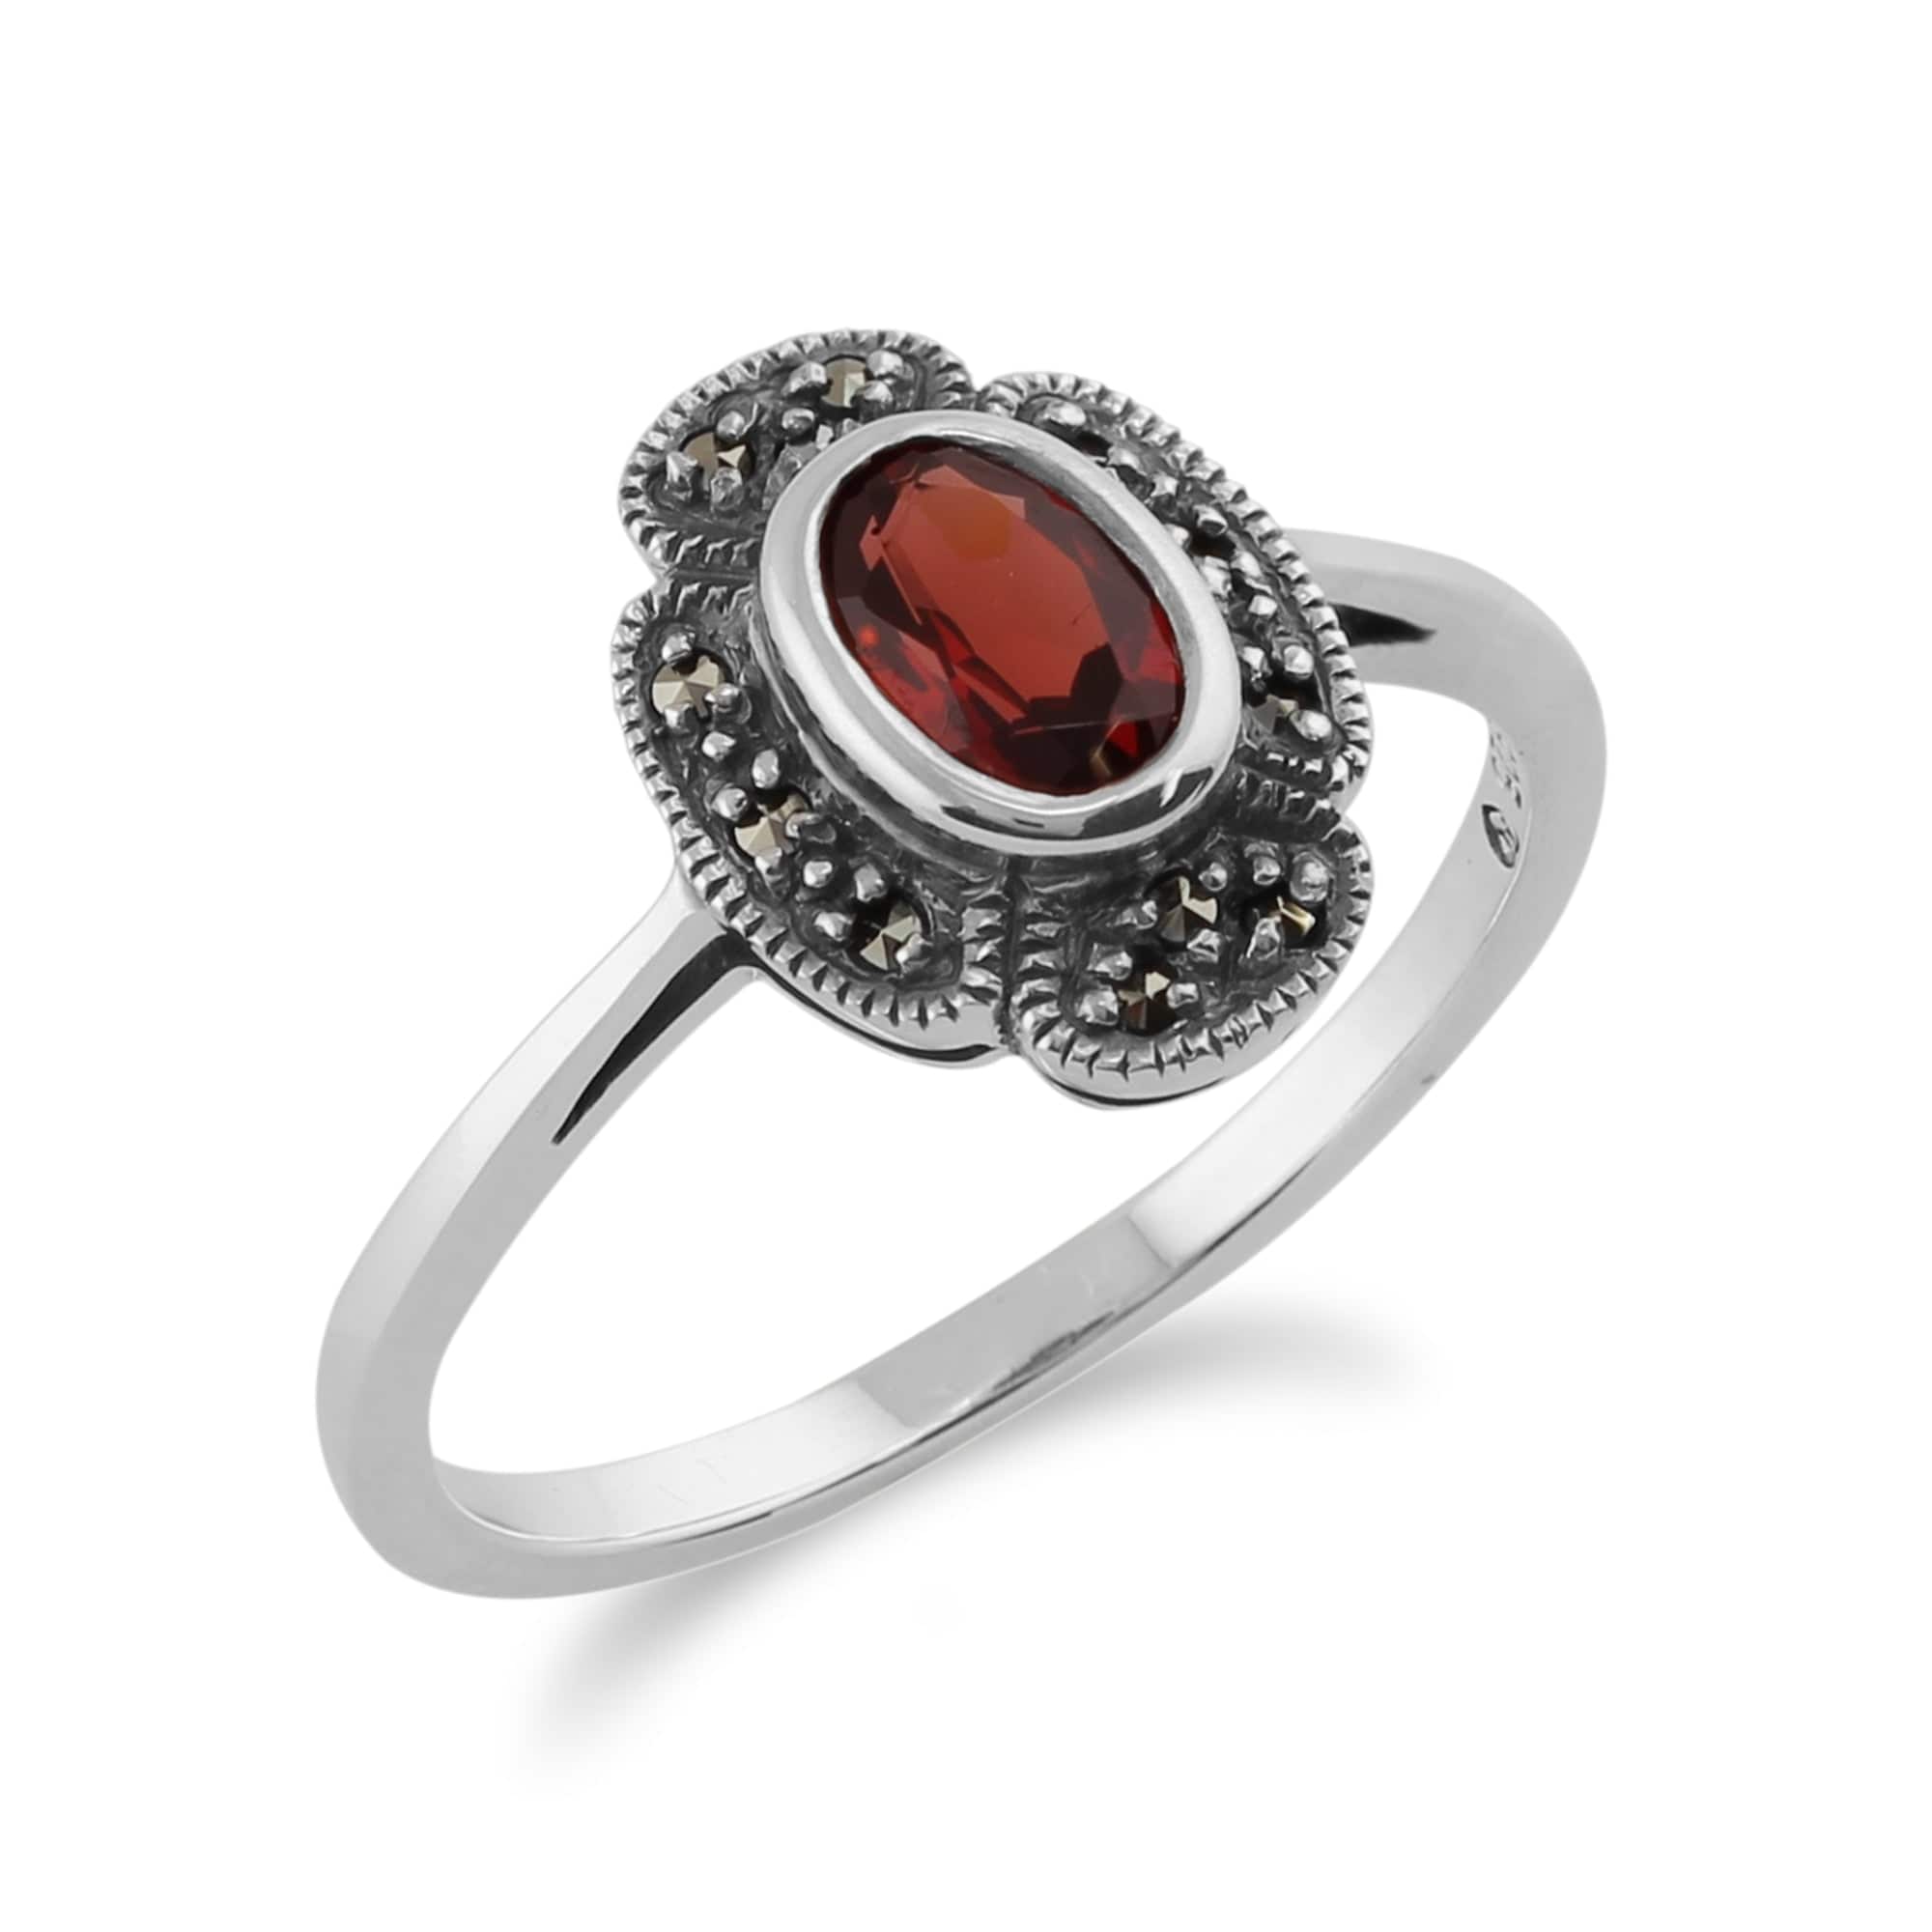 214R000222925 Art Deco Style Oval Garnet & Marcasite Ring in 925 Sterling Silver 2